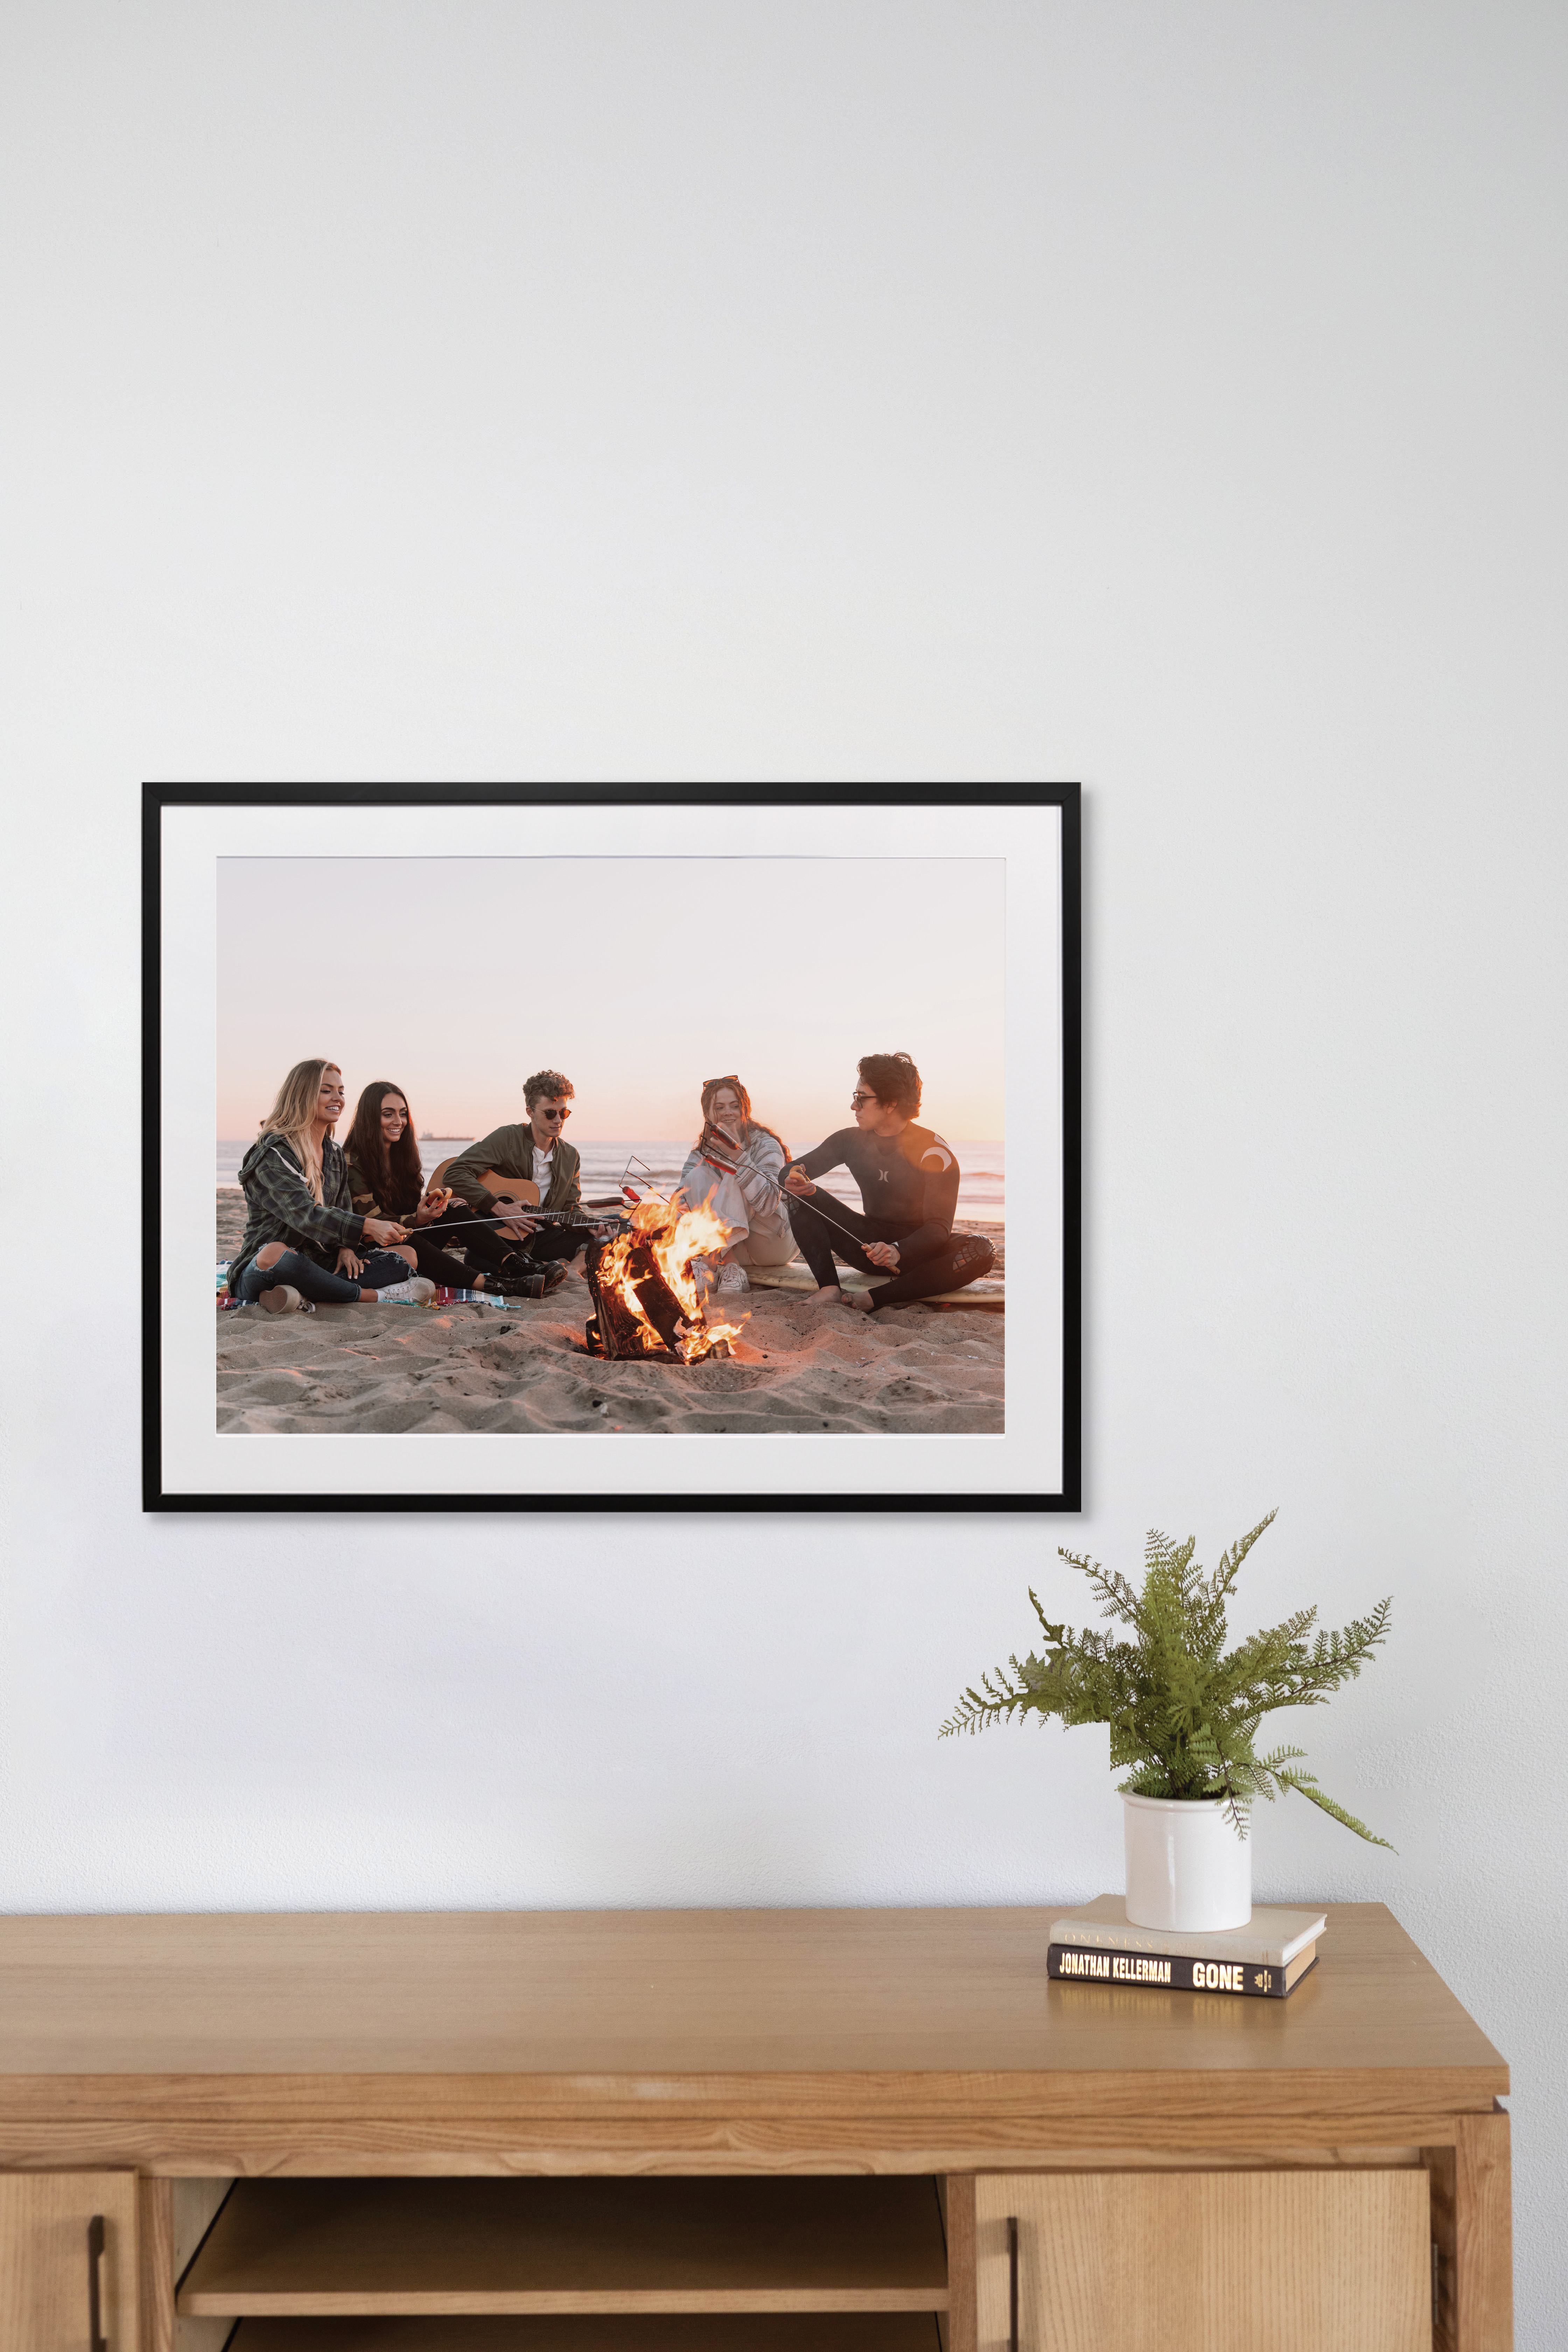 Framed print above desk of friends on the beach by the fire